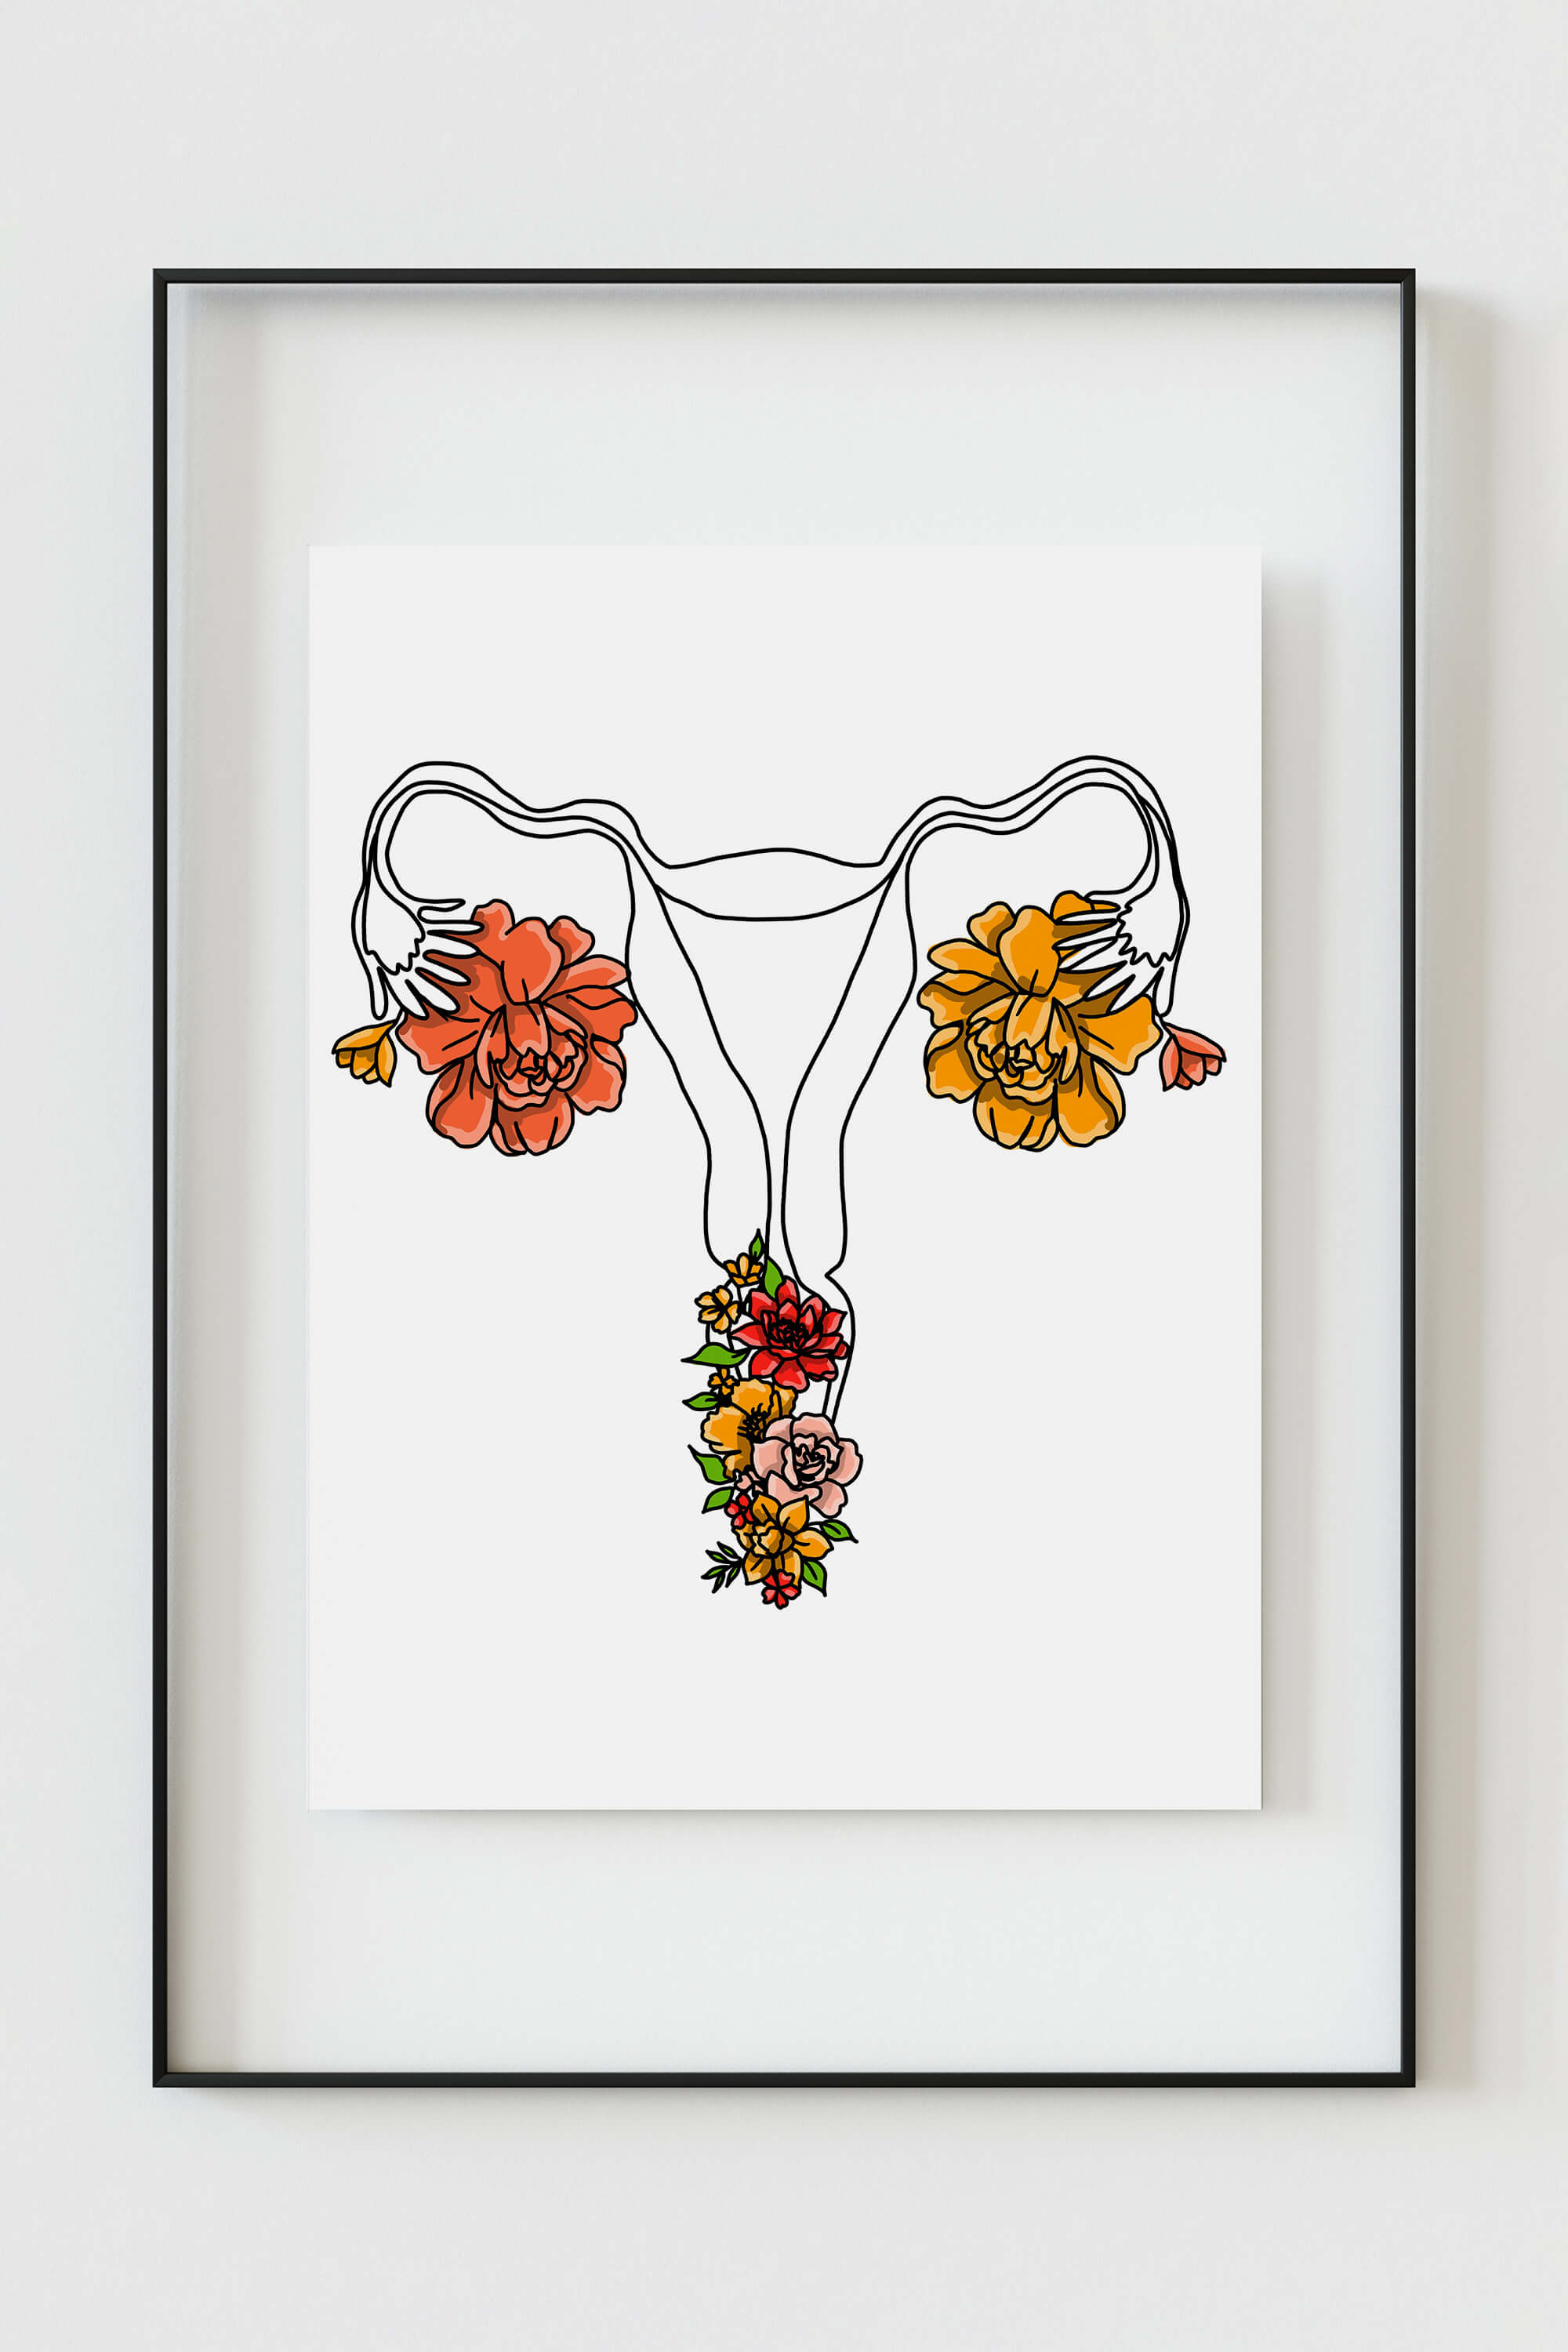 Vibrant Floral Anatomy Wall Art, an ideal gift showcasing appreciation for midwives' dedication.